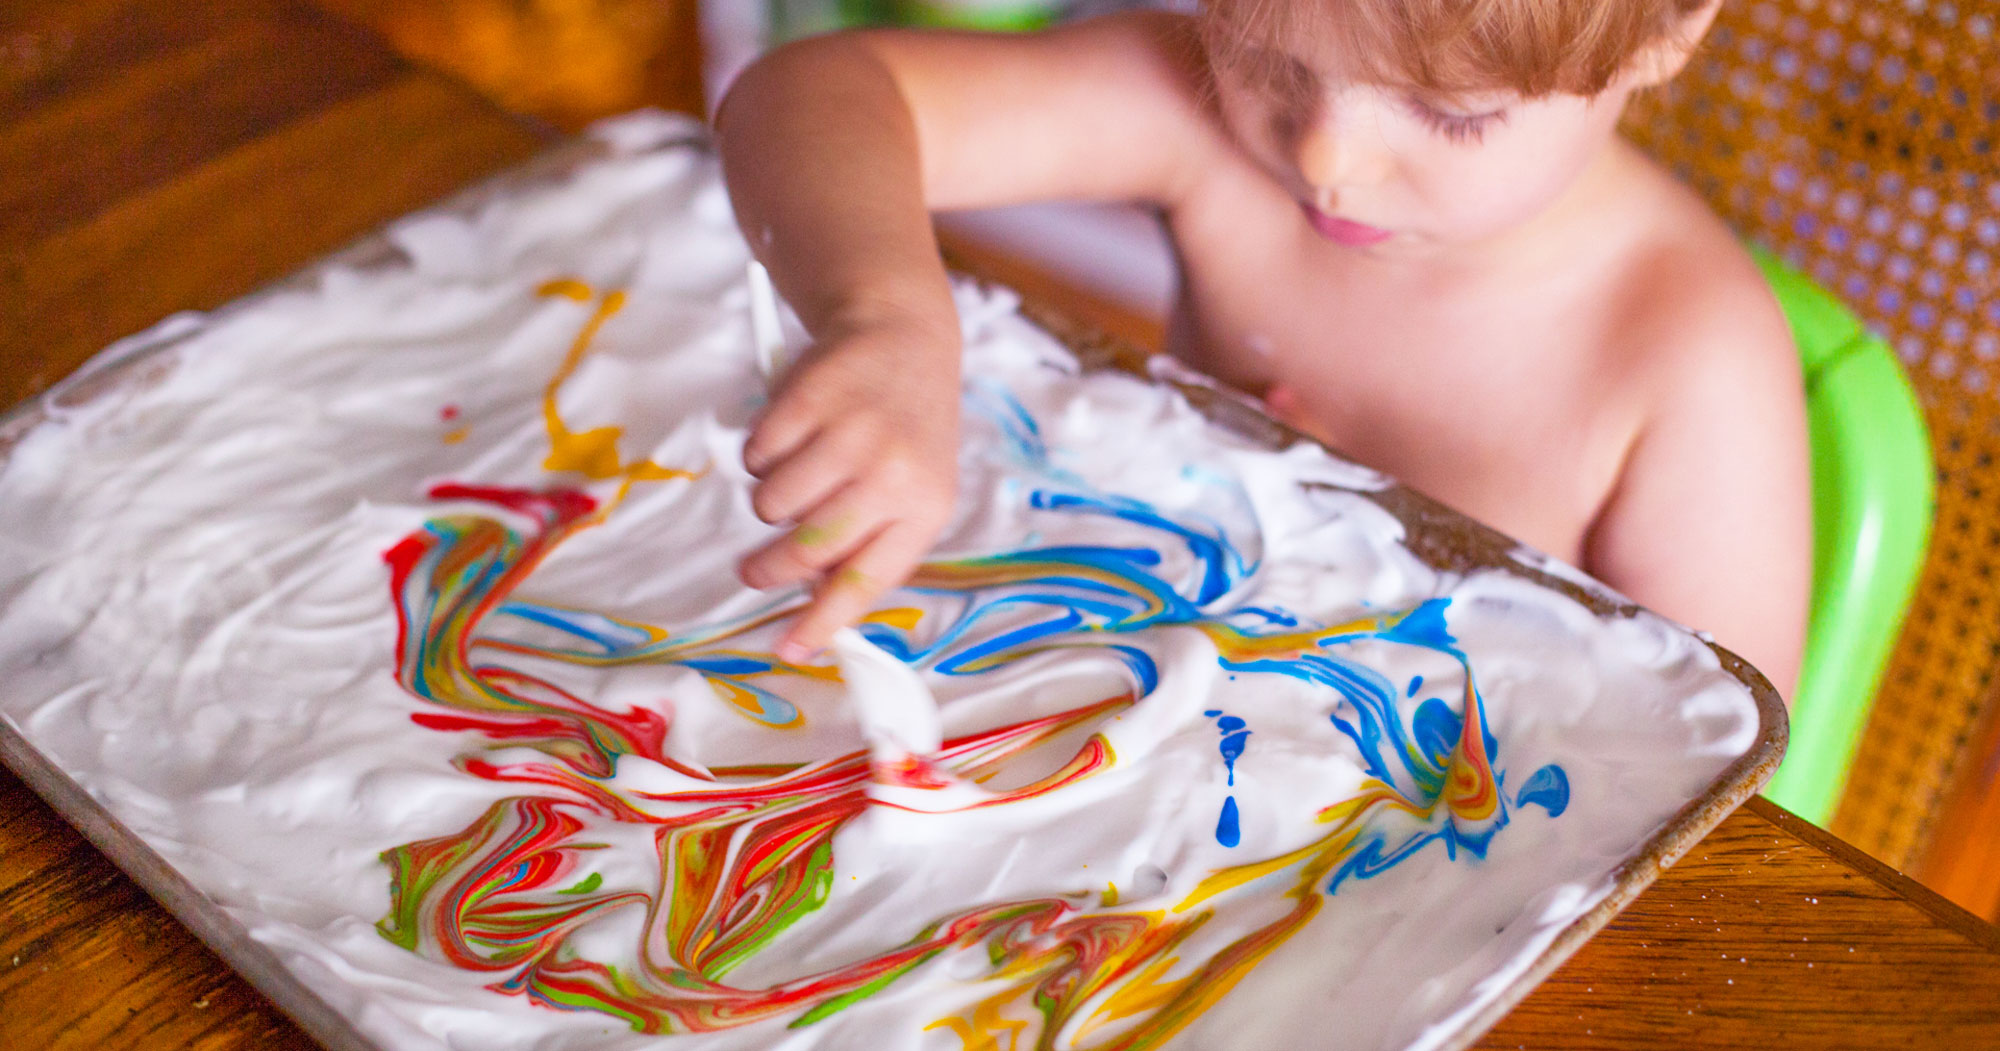 Shaving Cream Paint for Toddlers is a Fun Sensory Art Project!